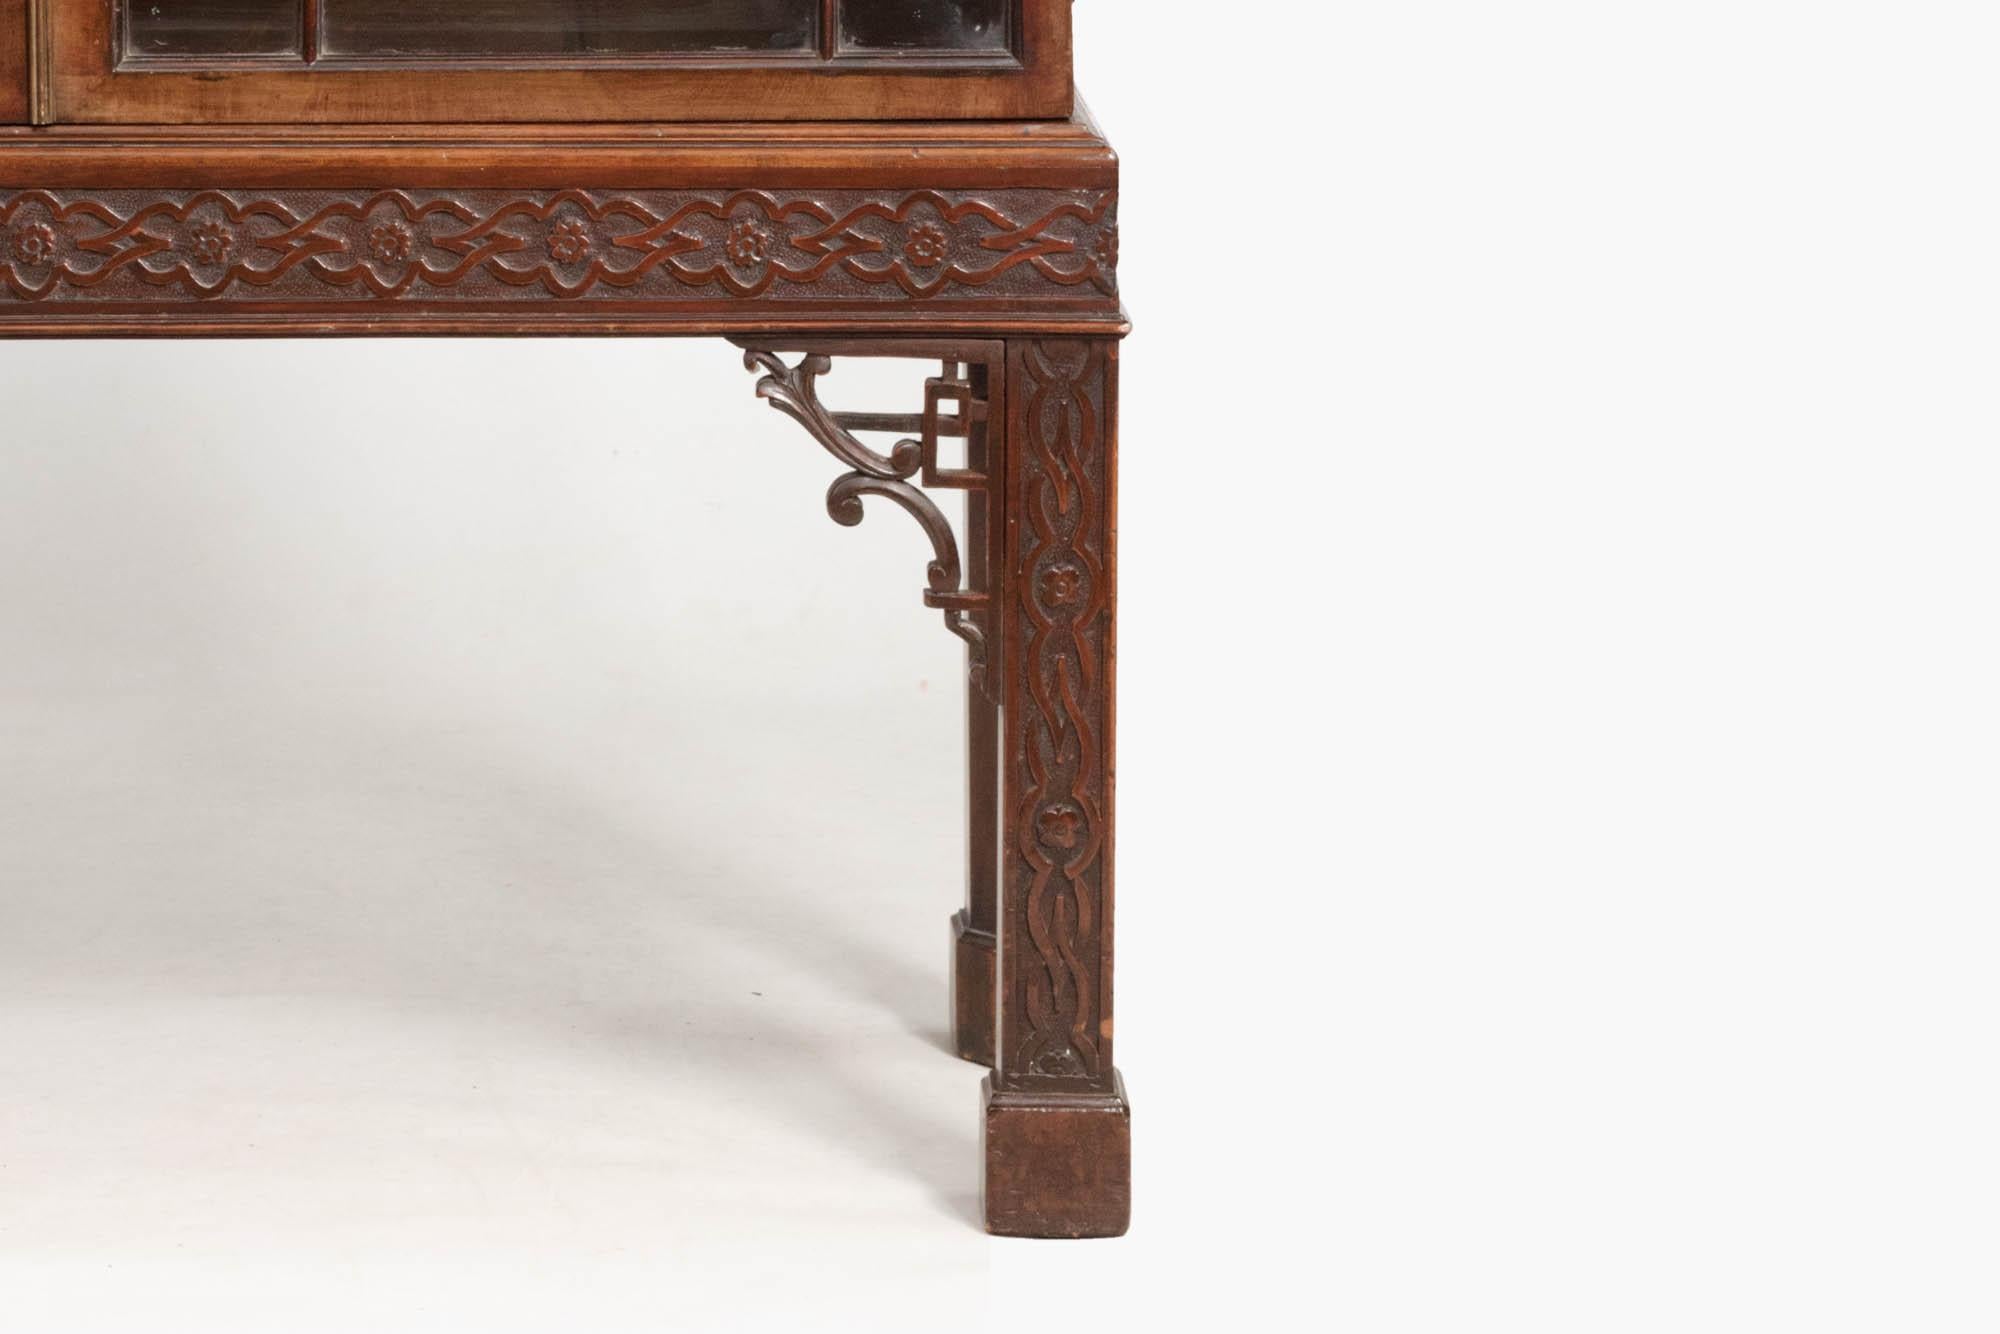 19th century Georgian mahogany Chinese Chippendale two-door display cabinet with finely carved details presenting seamless decoration across the rails and legs. The blind fretwork carved legs and pierced fine open fretwork spandrels compliment